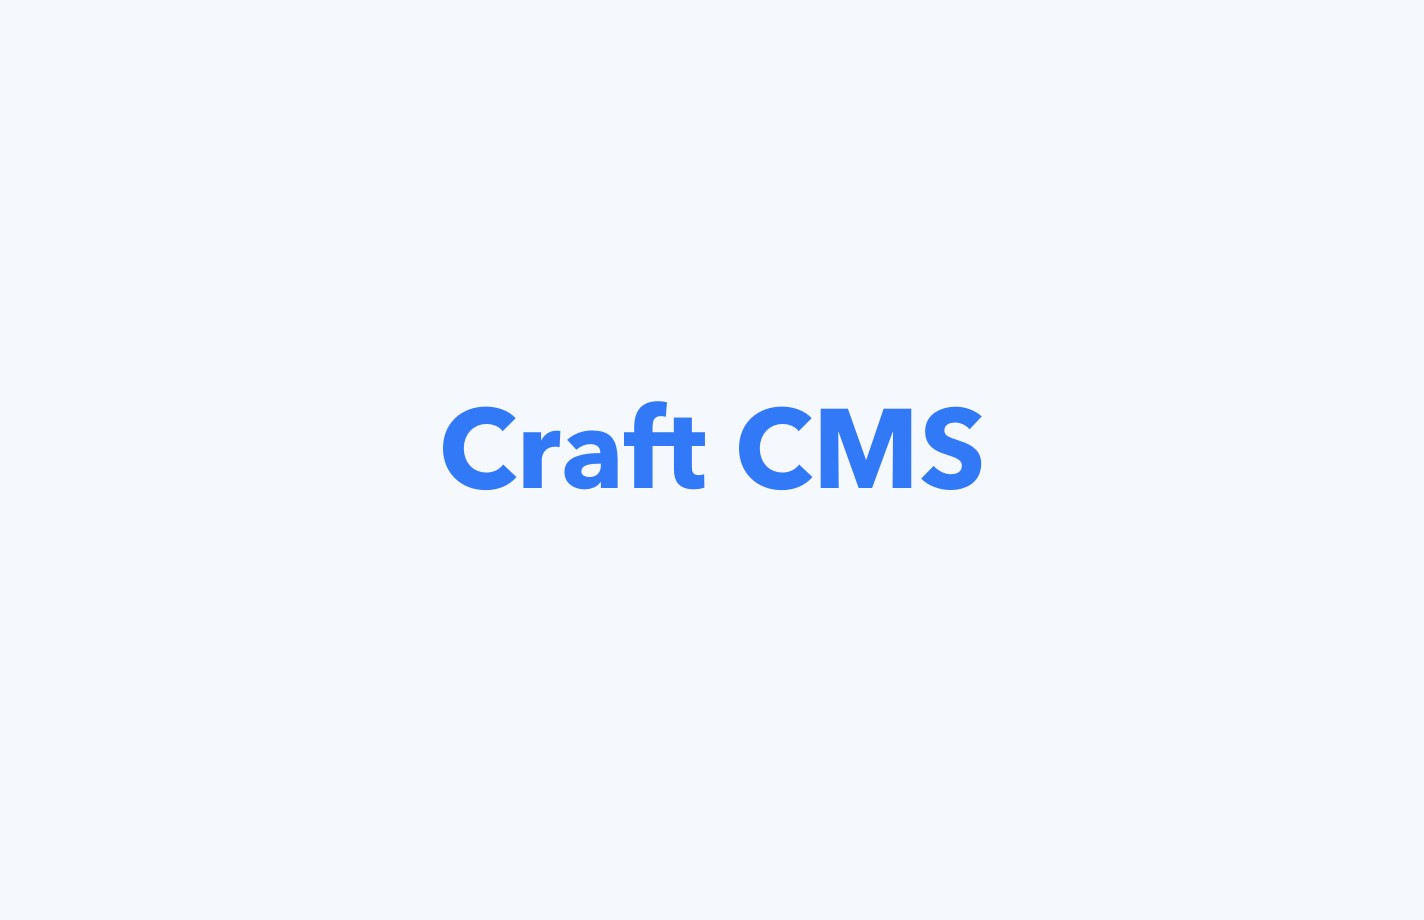 What is Craft CMS?